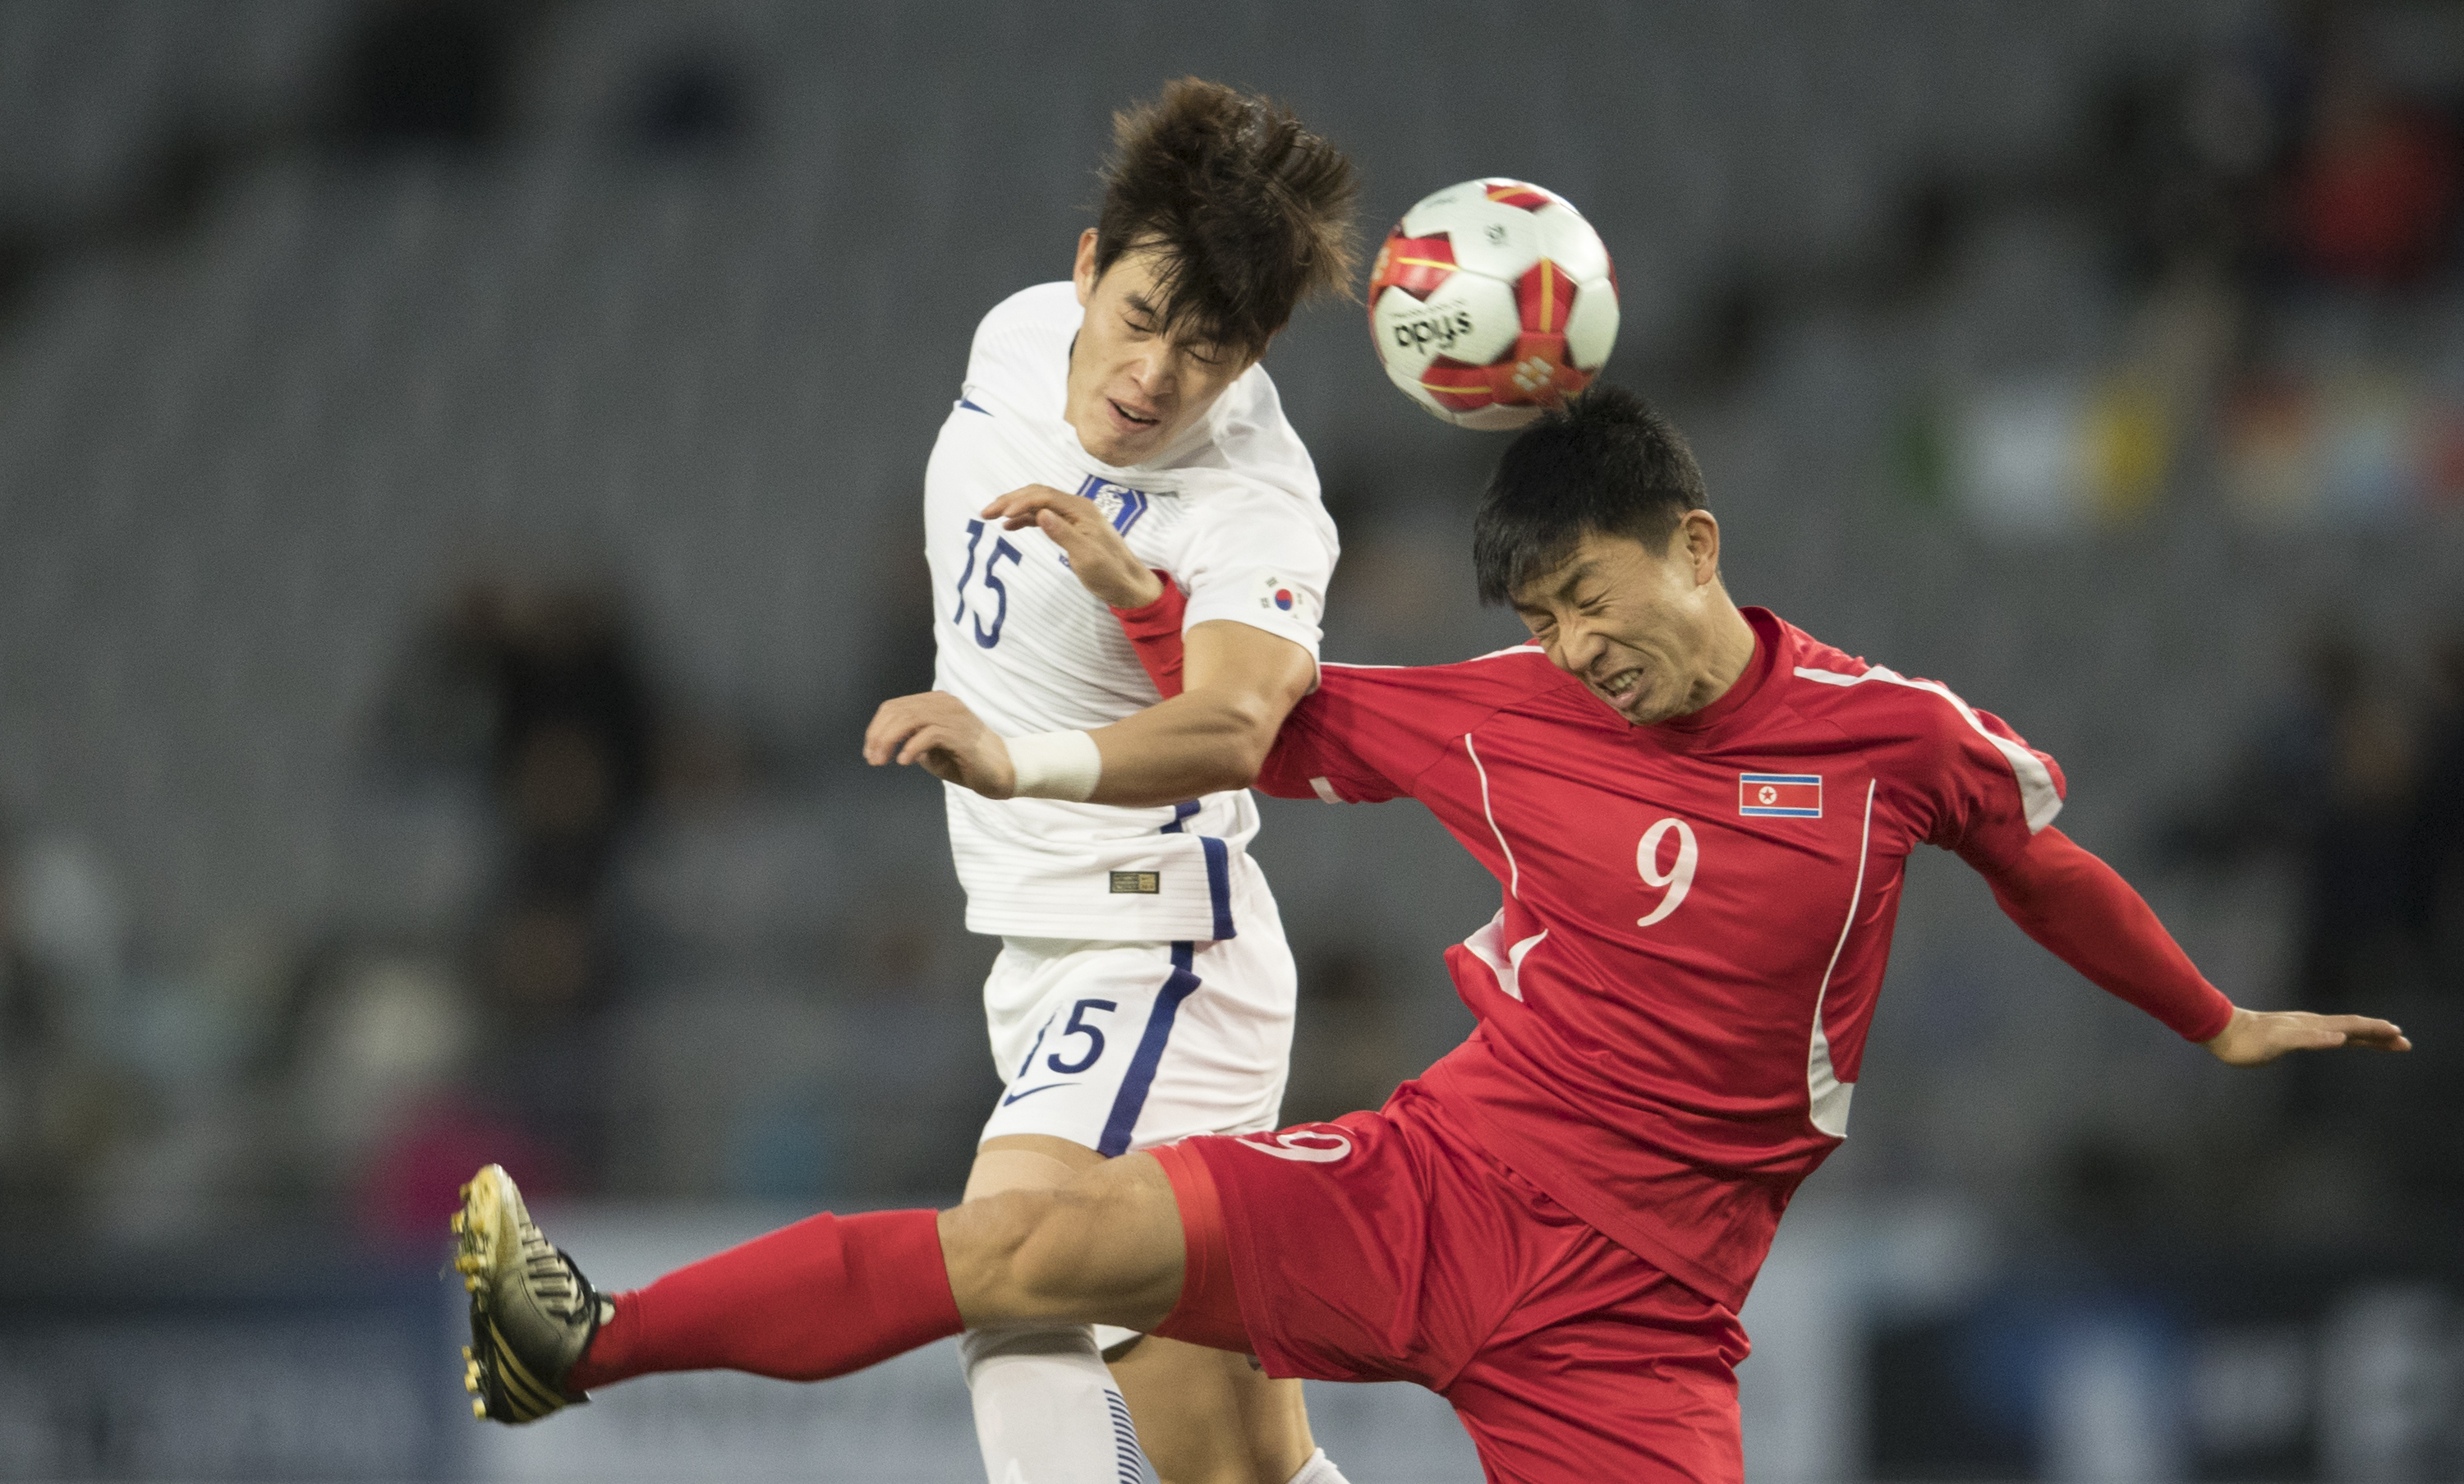 Pak Song Chol (#9) of North Korea and Lee changmin (#15) of South Korea in action during the EAFF E-1 Men's Football Championship at the Ajinomoto Stadium on December 12, 2017 in Chofu, Tokyo, Japan. (XIN LI—Getty Images)